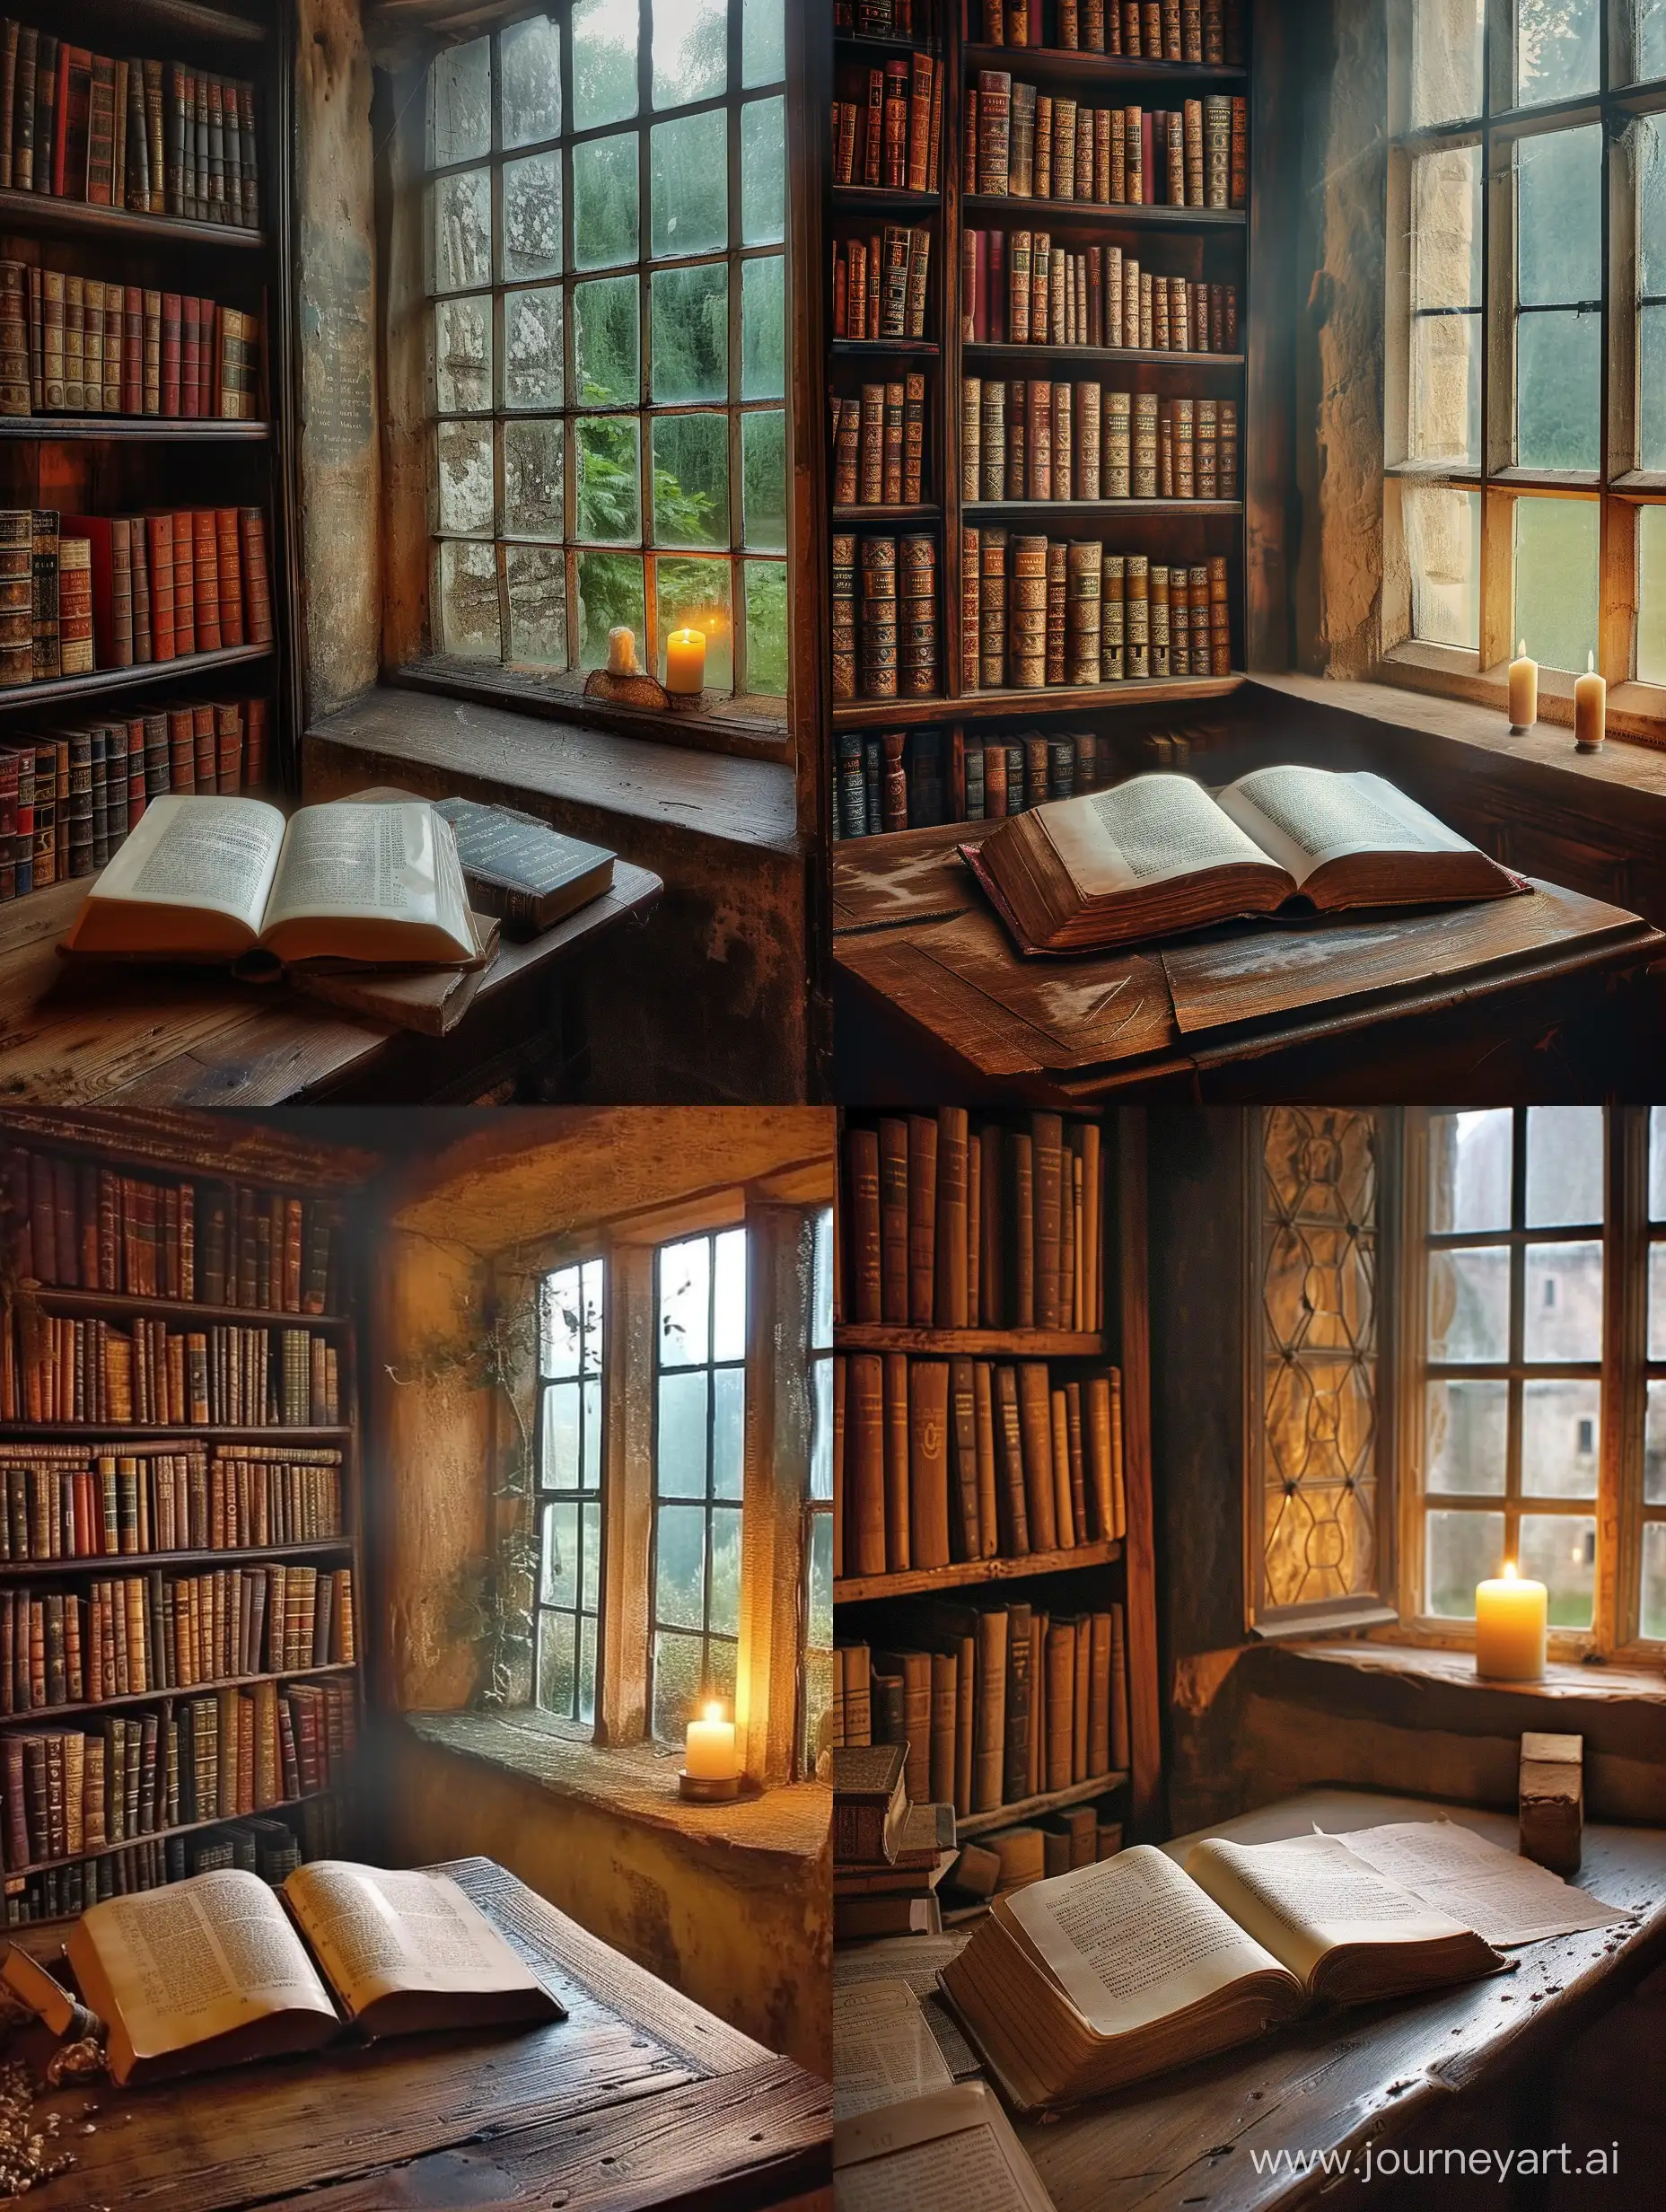 Enchanting-Old-English-Book-in-a-Dreamy-Room-with-Candlelit-Window